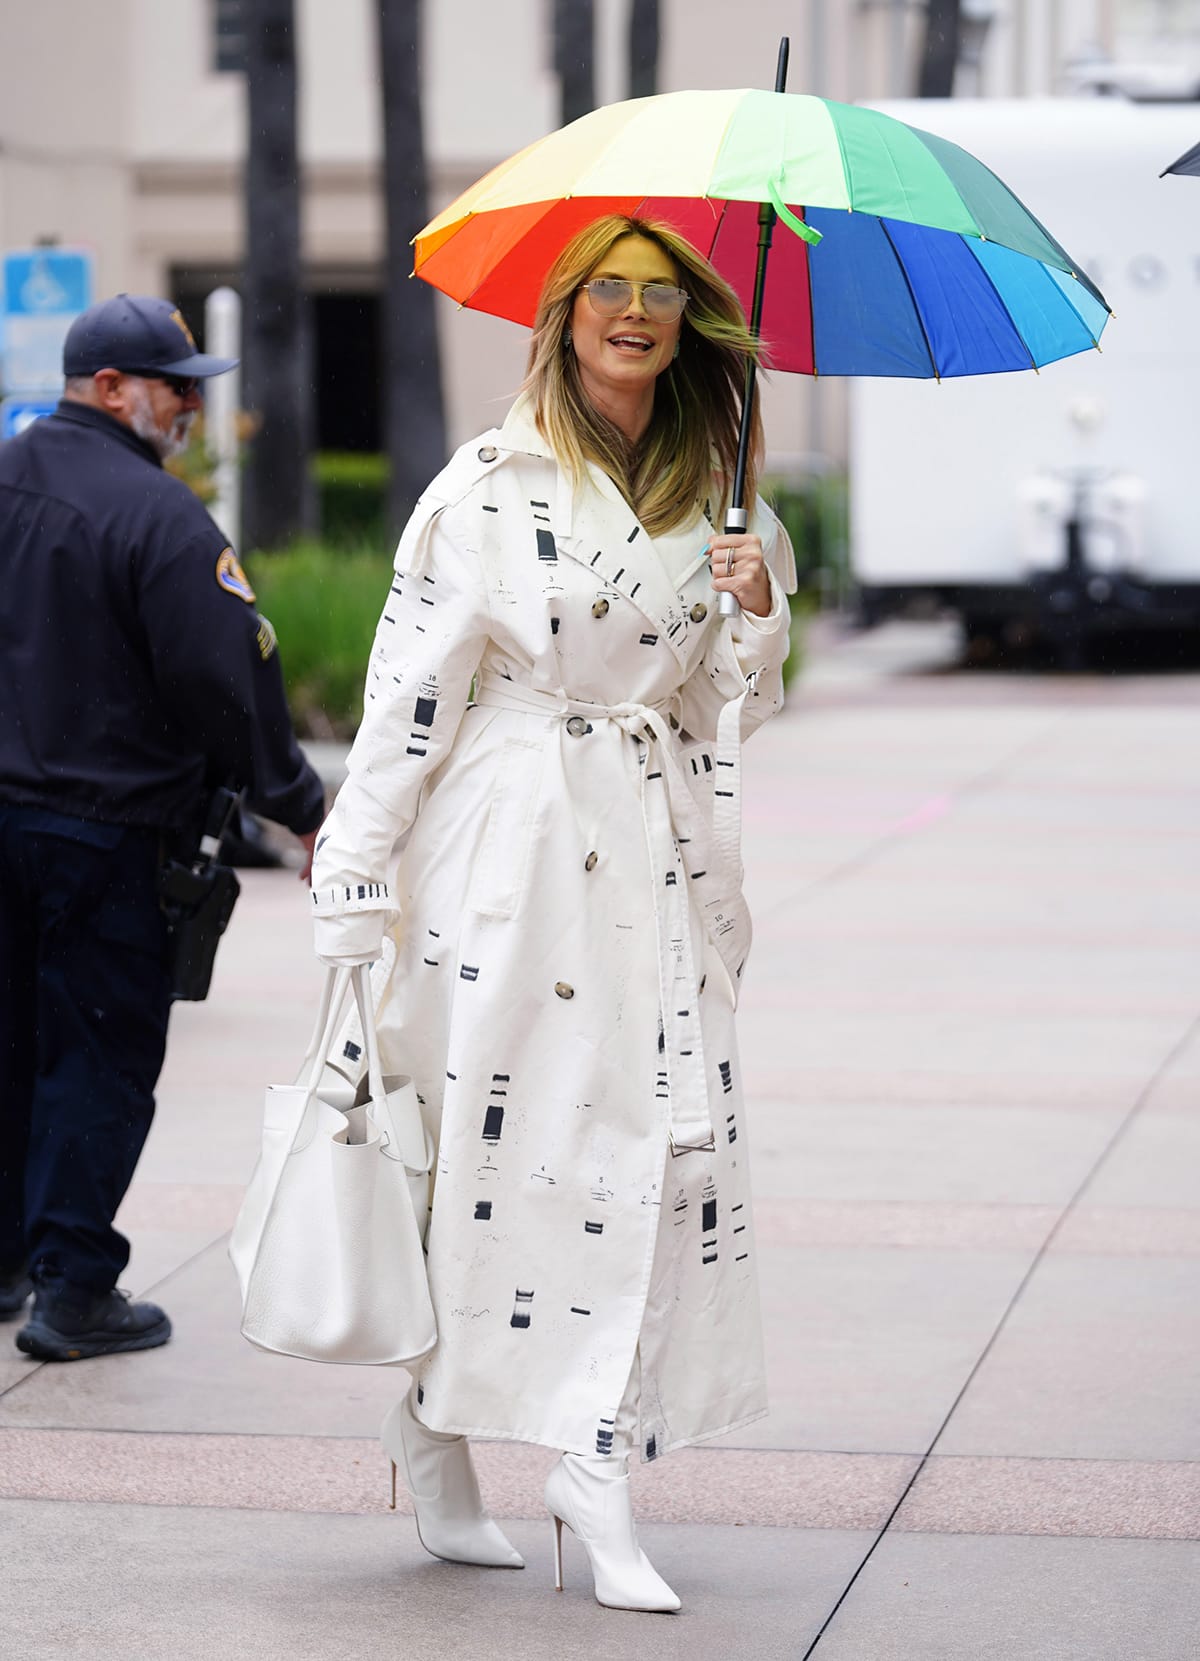 Heidi Klum embraces spring whites in a white Maison Blanche by Yannik Zamboni DNA Gel-Electrophoresis Trench Coat and white thigh-high boots outside the AGT studios on March 23, 2024